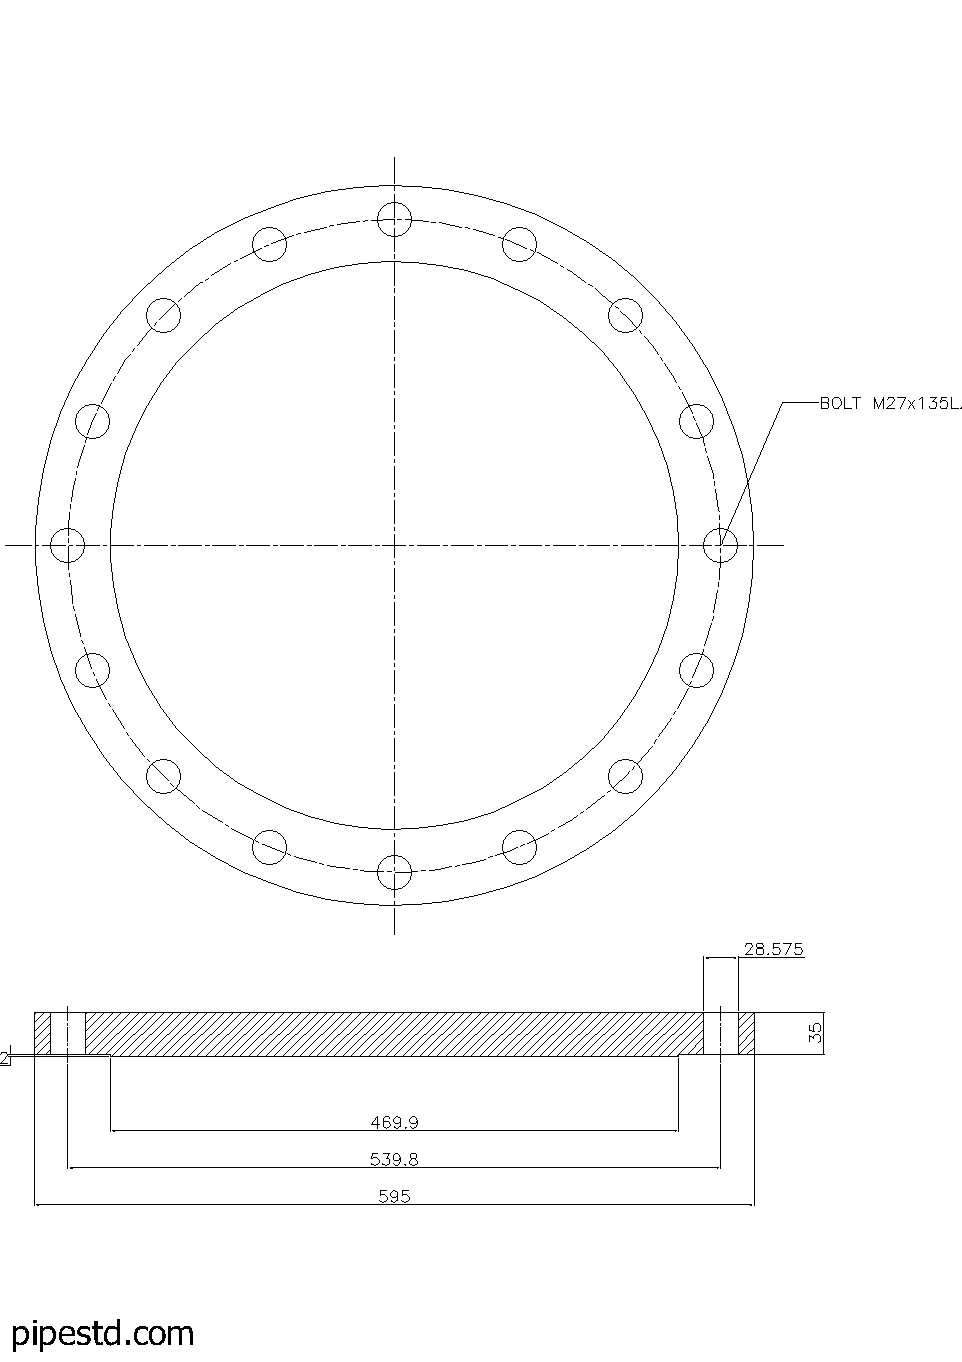 Blind Flange 16 Inch Class 150